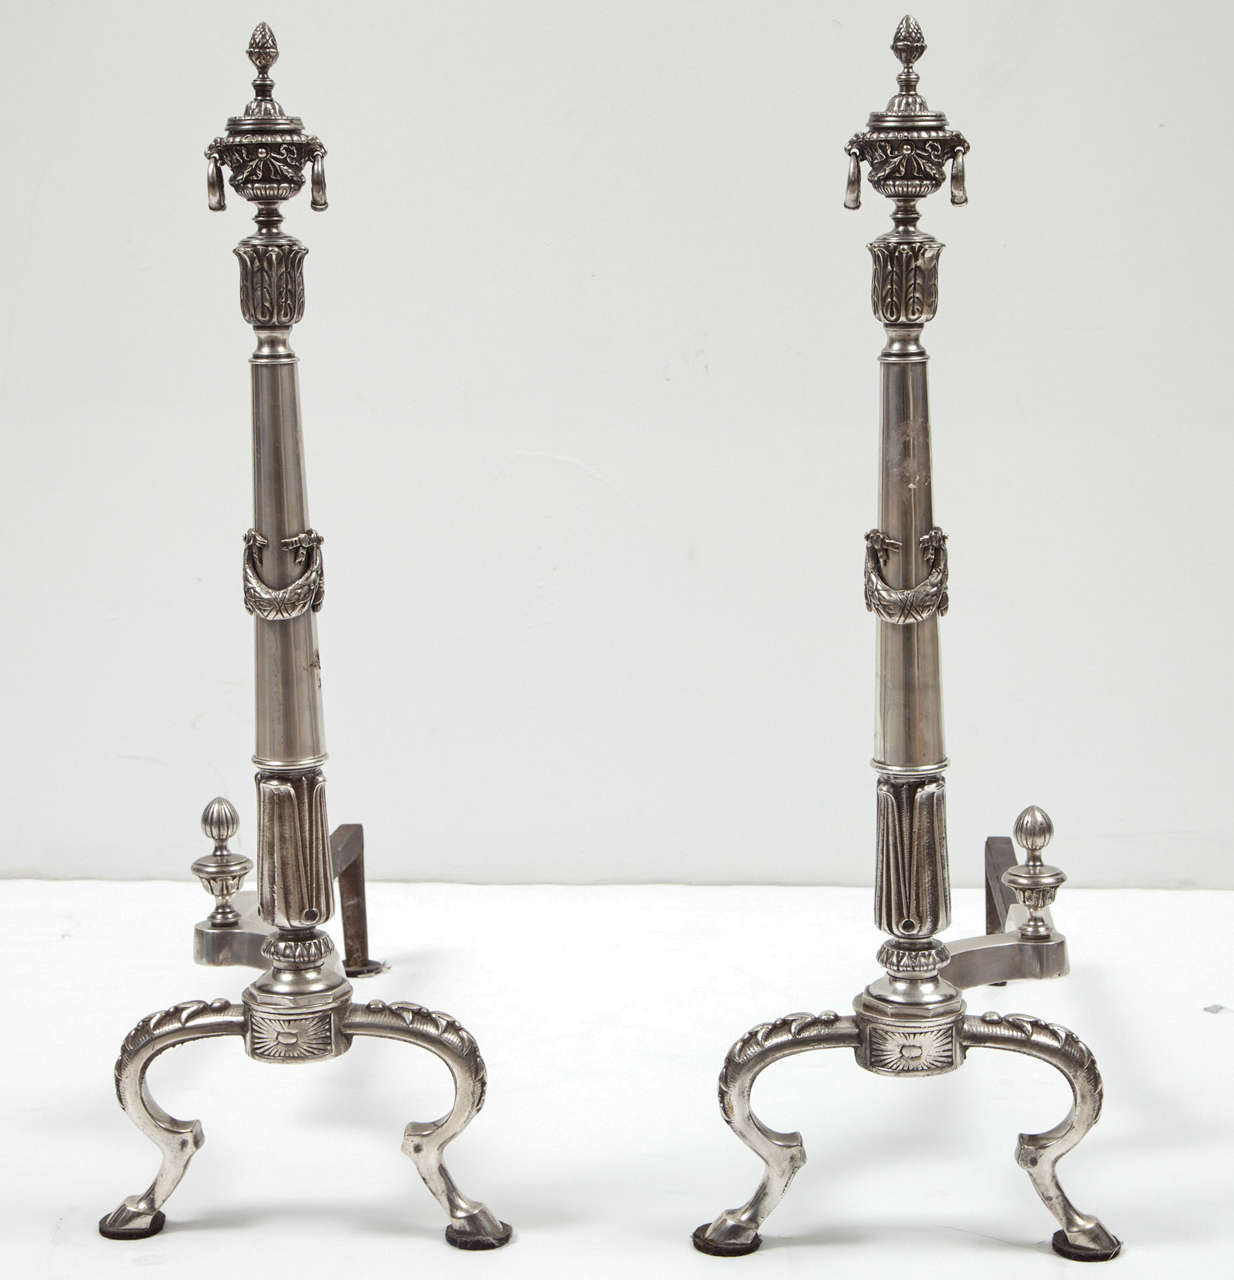 A striking pair of silver plate andirons with beautiful and intricate neoclassical details.